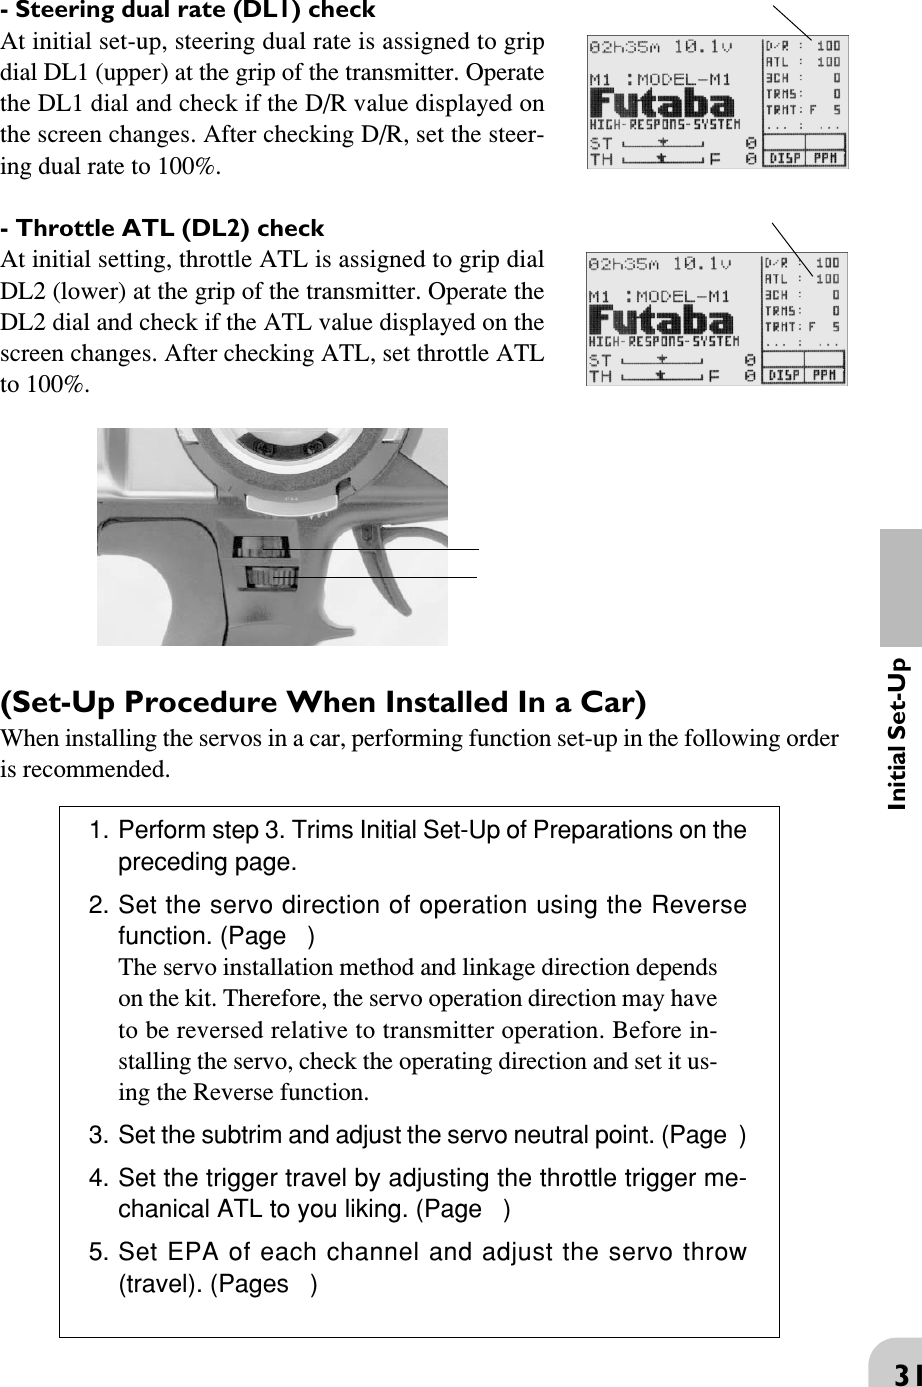 31Initial Set-Up(Set-Up Procedure When Installed In a Car)When installing the servos in a car, performing function set-up in the following orderis recommended.1. Perform step 3. Trims Initial Set-Up of Preparations on thepreceding page.2. Set the servo direction of operation using the Reversefunction. (Page   )The servo installation method and linkage direction dependson the kit. Therefore, the servo operation direction may haveto be reversed relative to transmitter operation. Before in-stalling the servo, check the operating direction and set it us-ing the Reverse function.3. Set the subtrim and adjust the servo neutral point. (Page  )4. Set the trigger travel by adjusting the throttle trigger me-chanical ATL to you liking. (Page   )5. Set EPA of each channel and adjust the servo throw(travel). (Pages   )- Steering dual rate (DL1) checkAt initial set-up, steering dual rate is assigned to gripdial DL1 (upper) at the grip of the transmitter. Operatethe DL1 dial and check if the D/R value displayed onthe screen changes. After checking D/R, set the steer-ing dual rate to 100%.- Throttle ATL (DL2) checkAt initial setting, throttle ATL is assigned to grip dialDL2 (lower) at the grip of the transmitter. Operate theDL2 dial and check if the ATL value displayed on thescreen changes. After checking ATL, set throttle ATLto 100%.